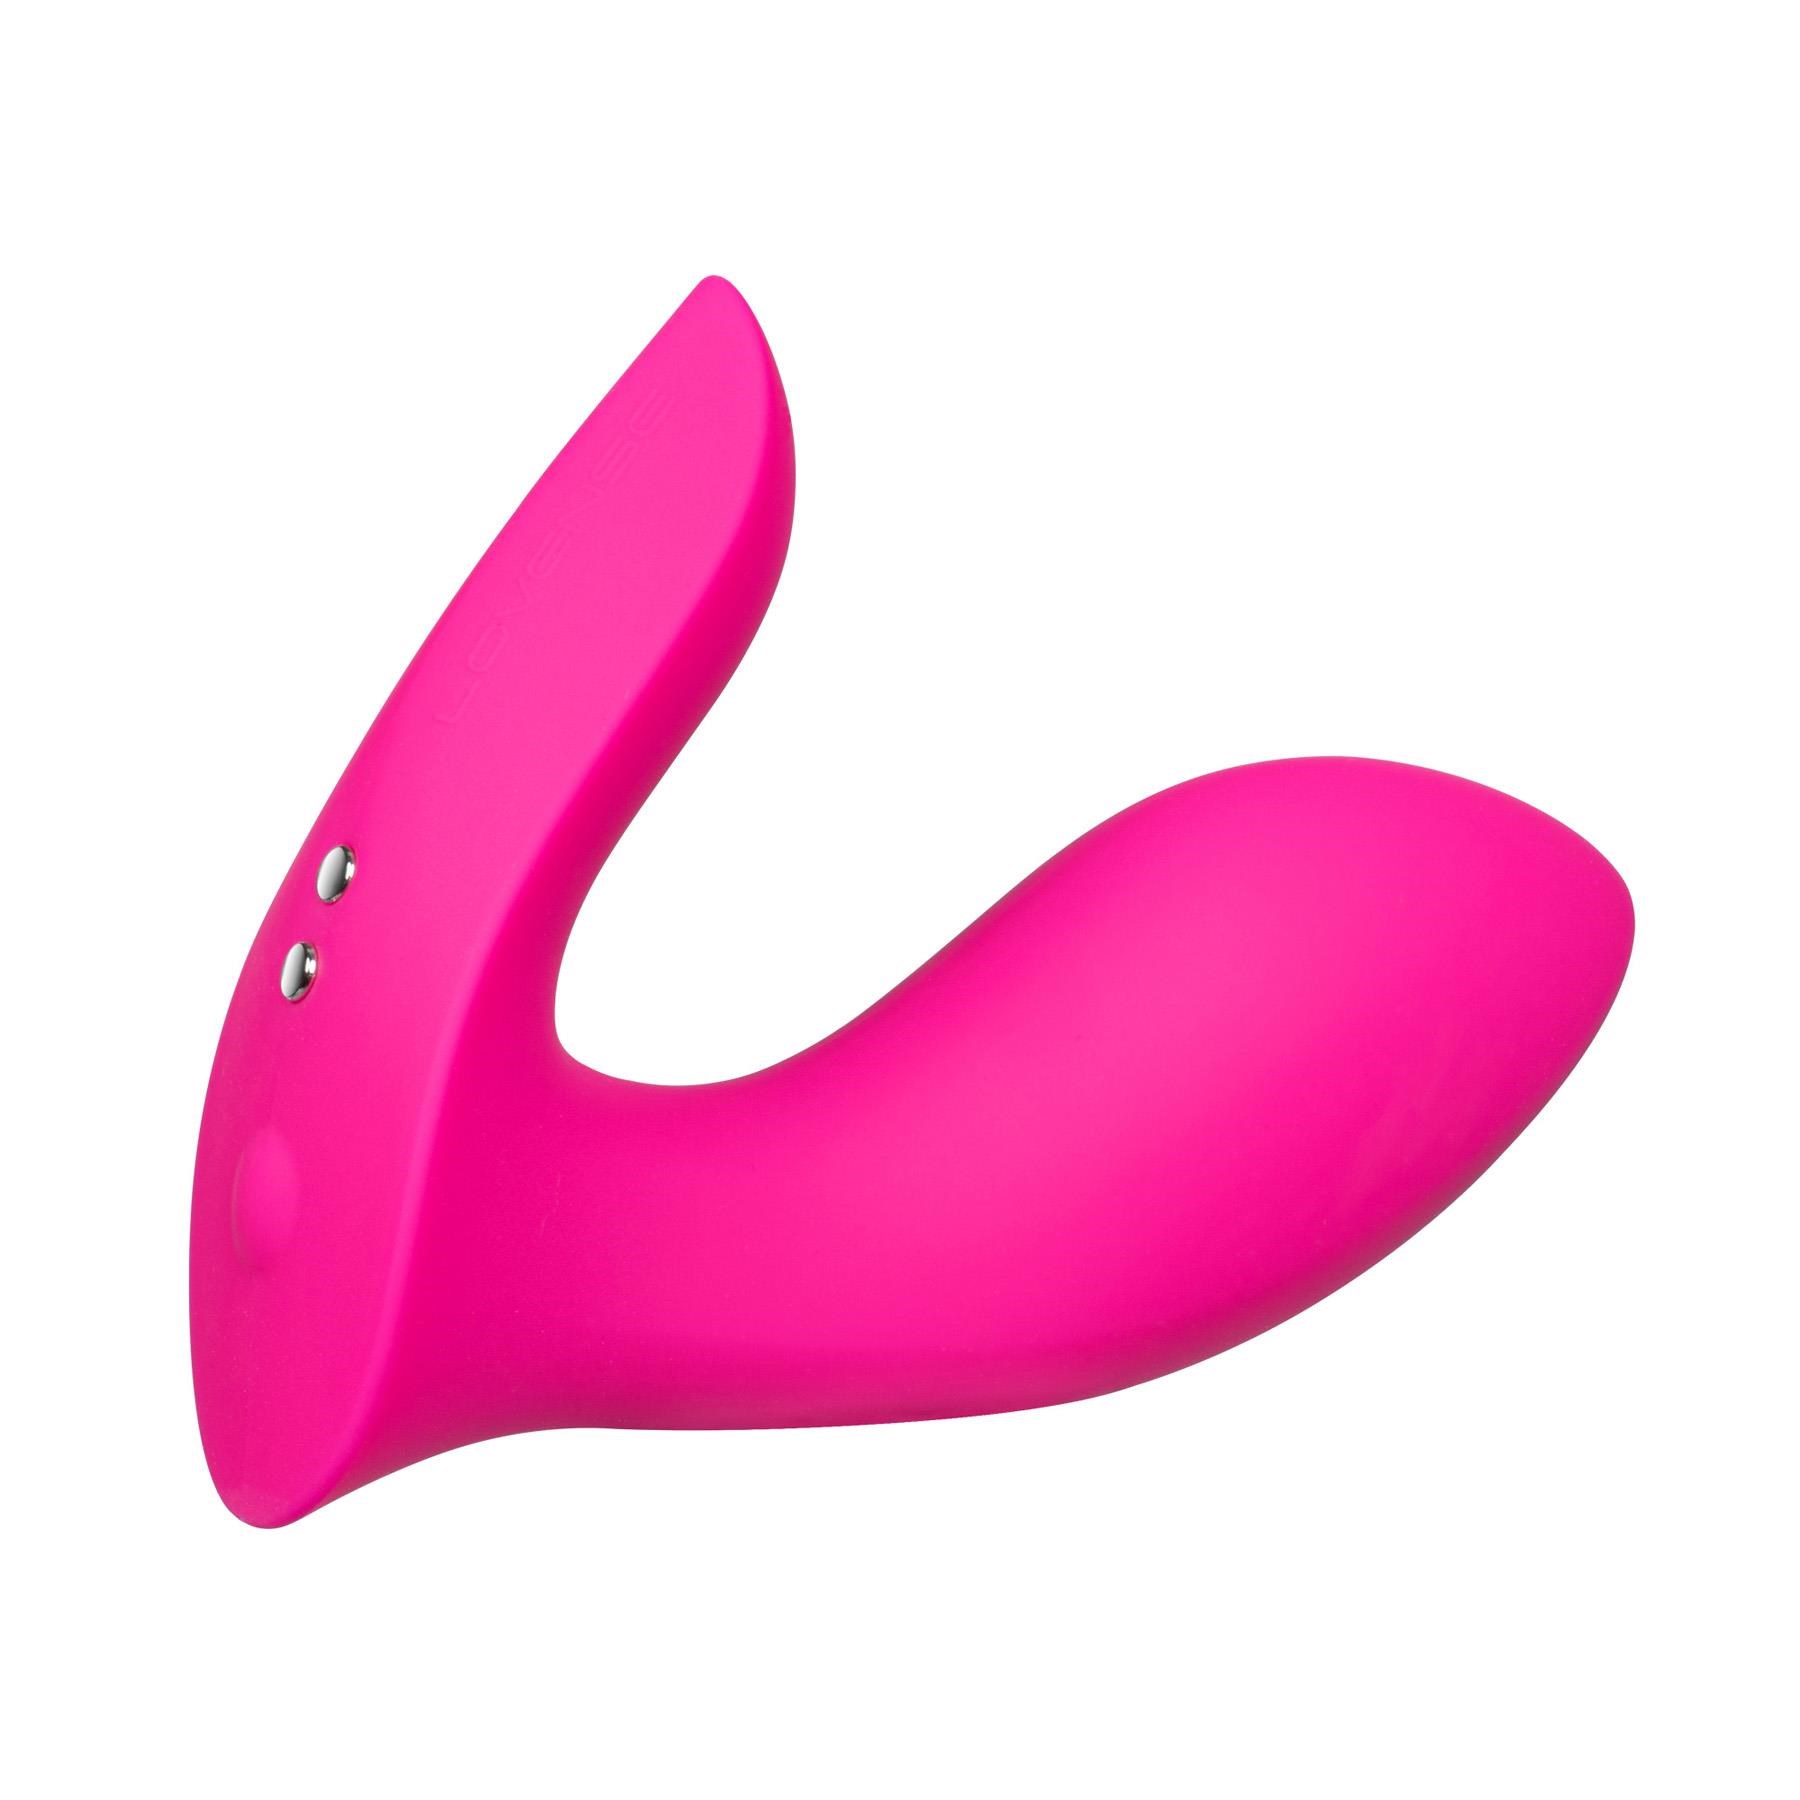 Lovense Bluetooth Flexer Come Hither Vibrator - Product Shot #3